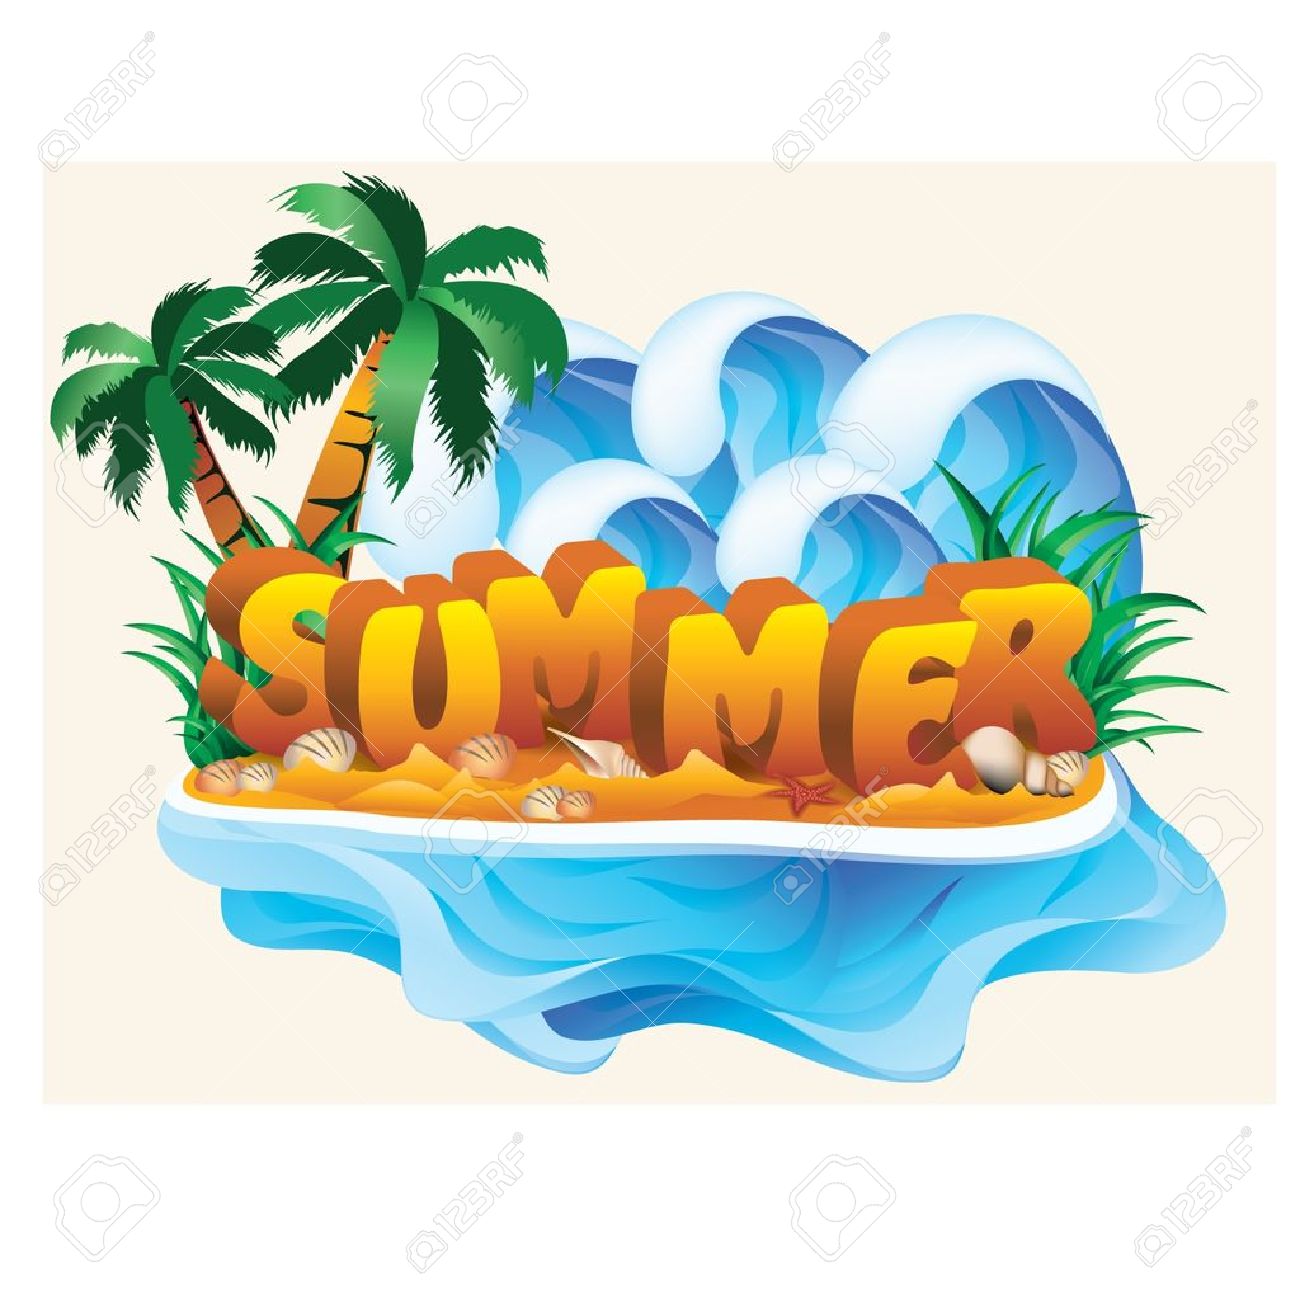 Summer time clipart.